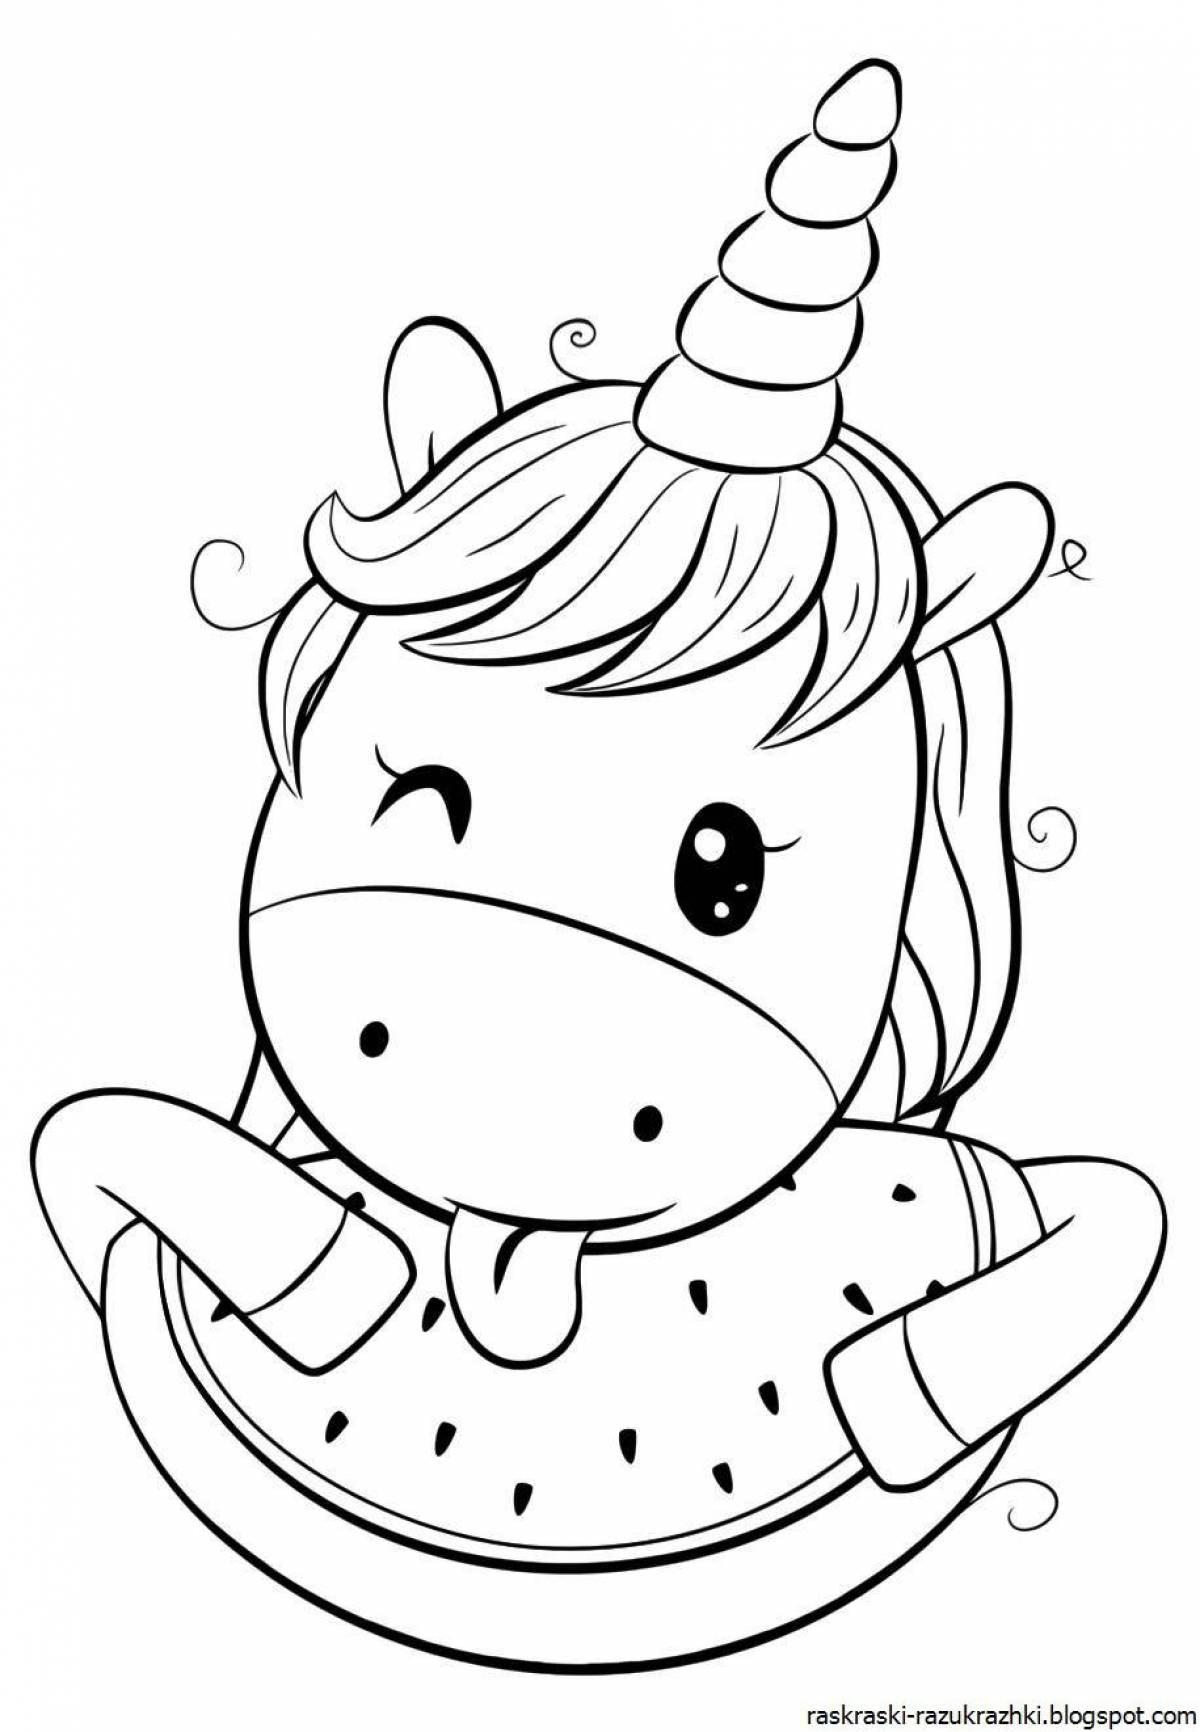 Exquisite unicorn coloring book for 4-5 year olds